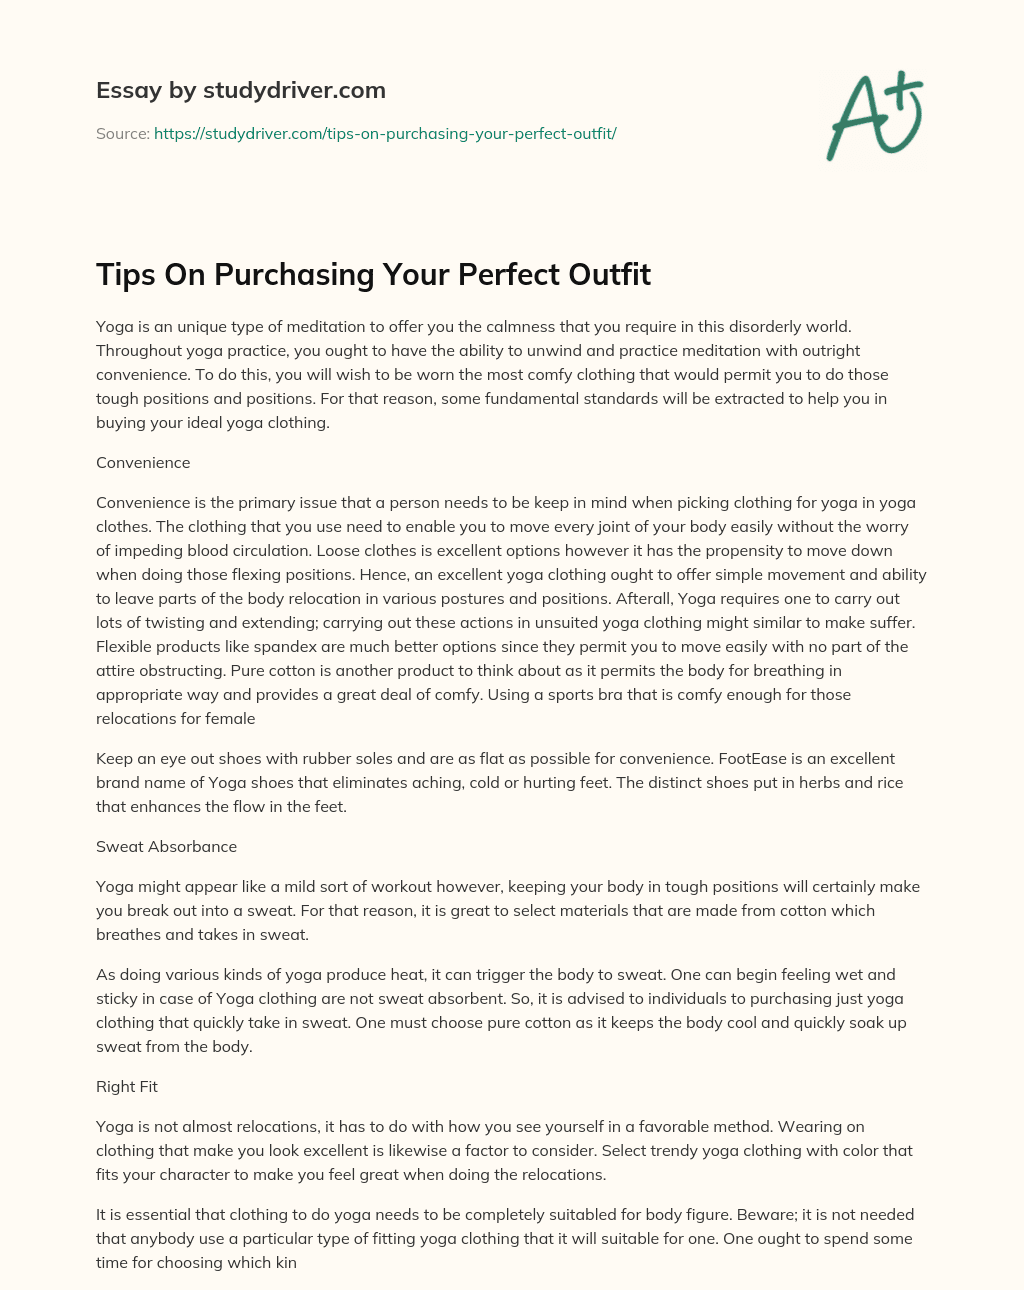 Tips on Purchasing your Perfect Outfit essay